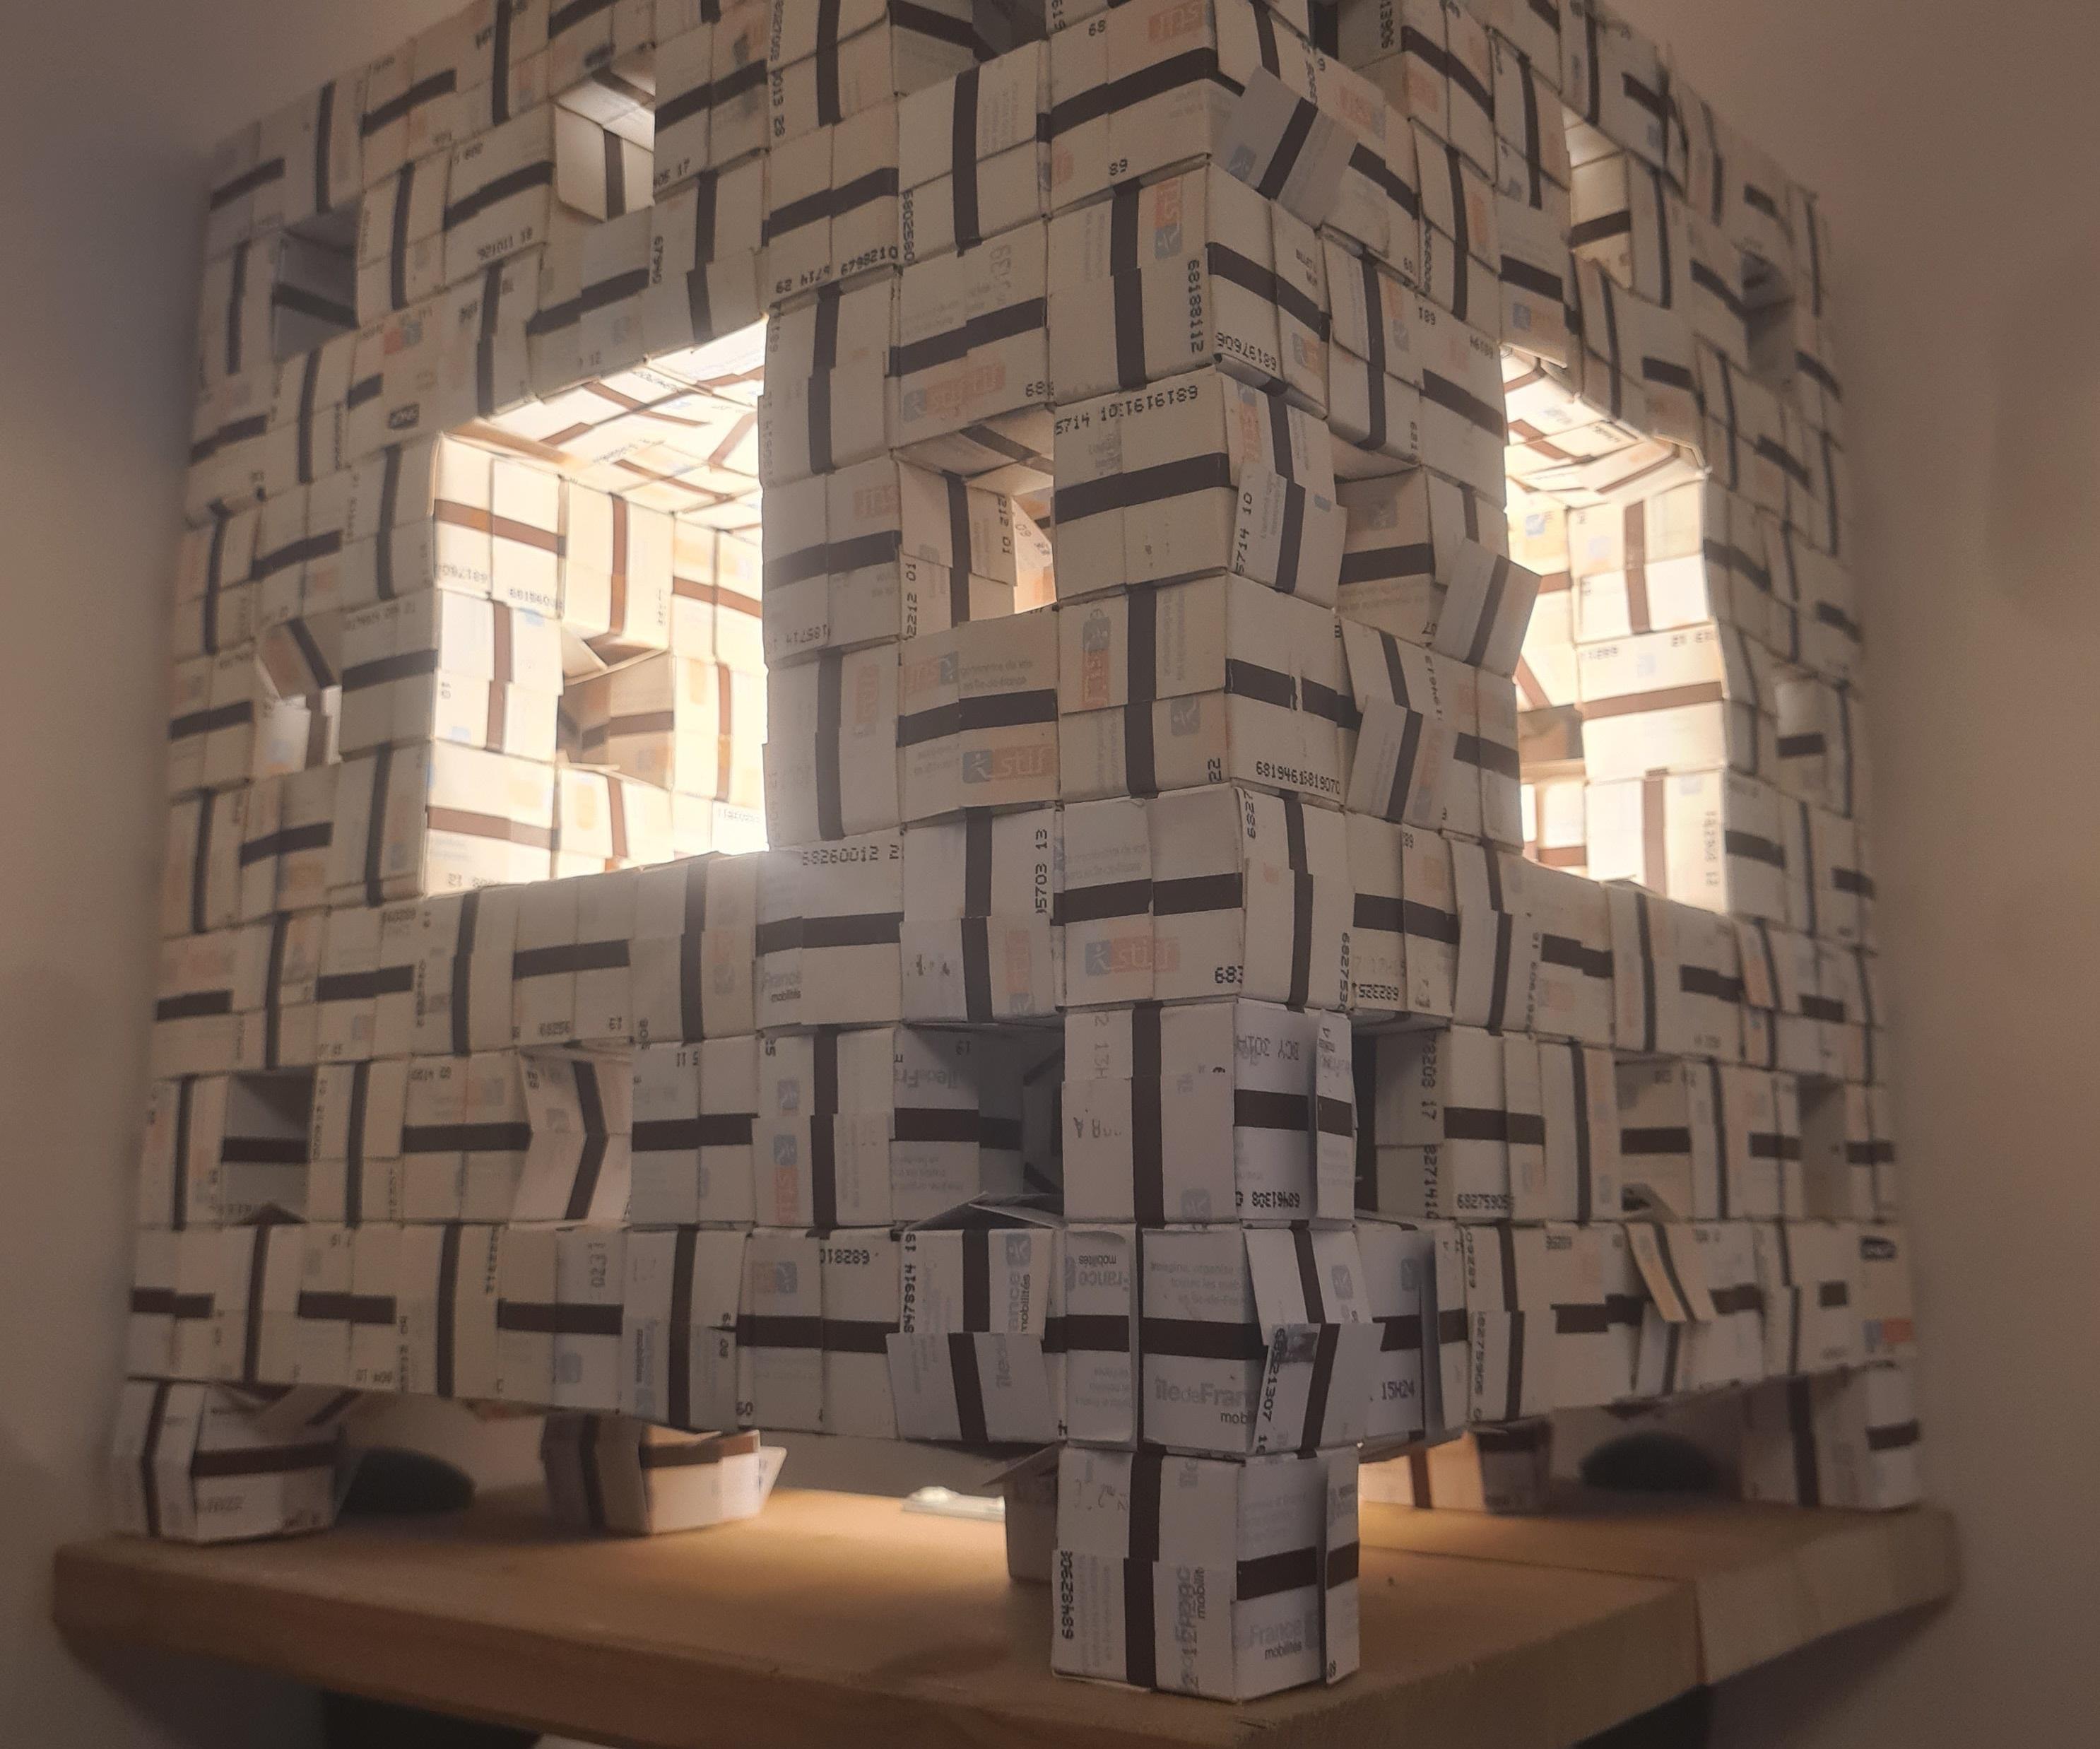 Menger's Cube Cardboard Lampshade Made From Metro Tickets